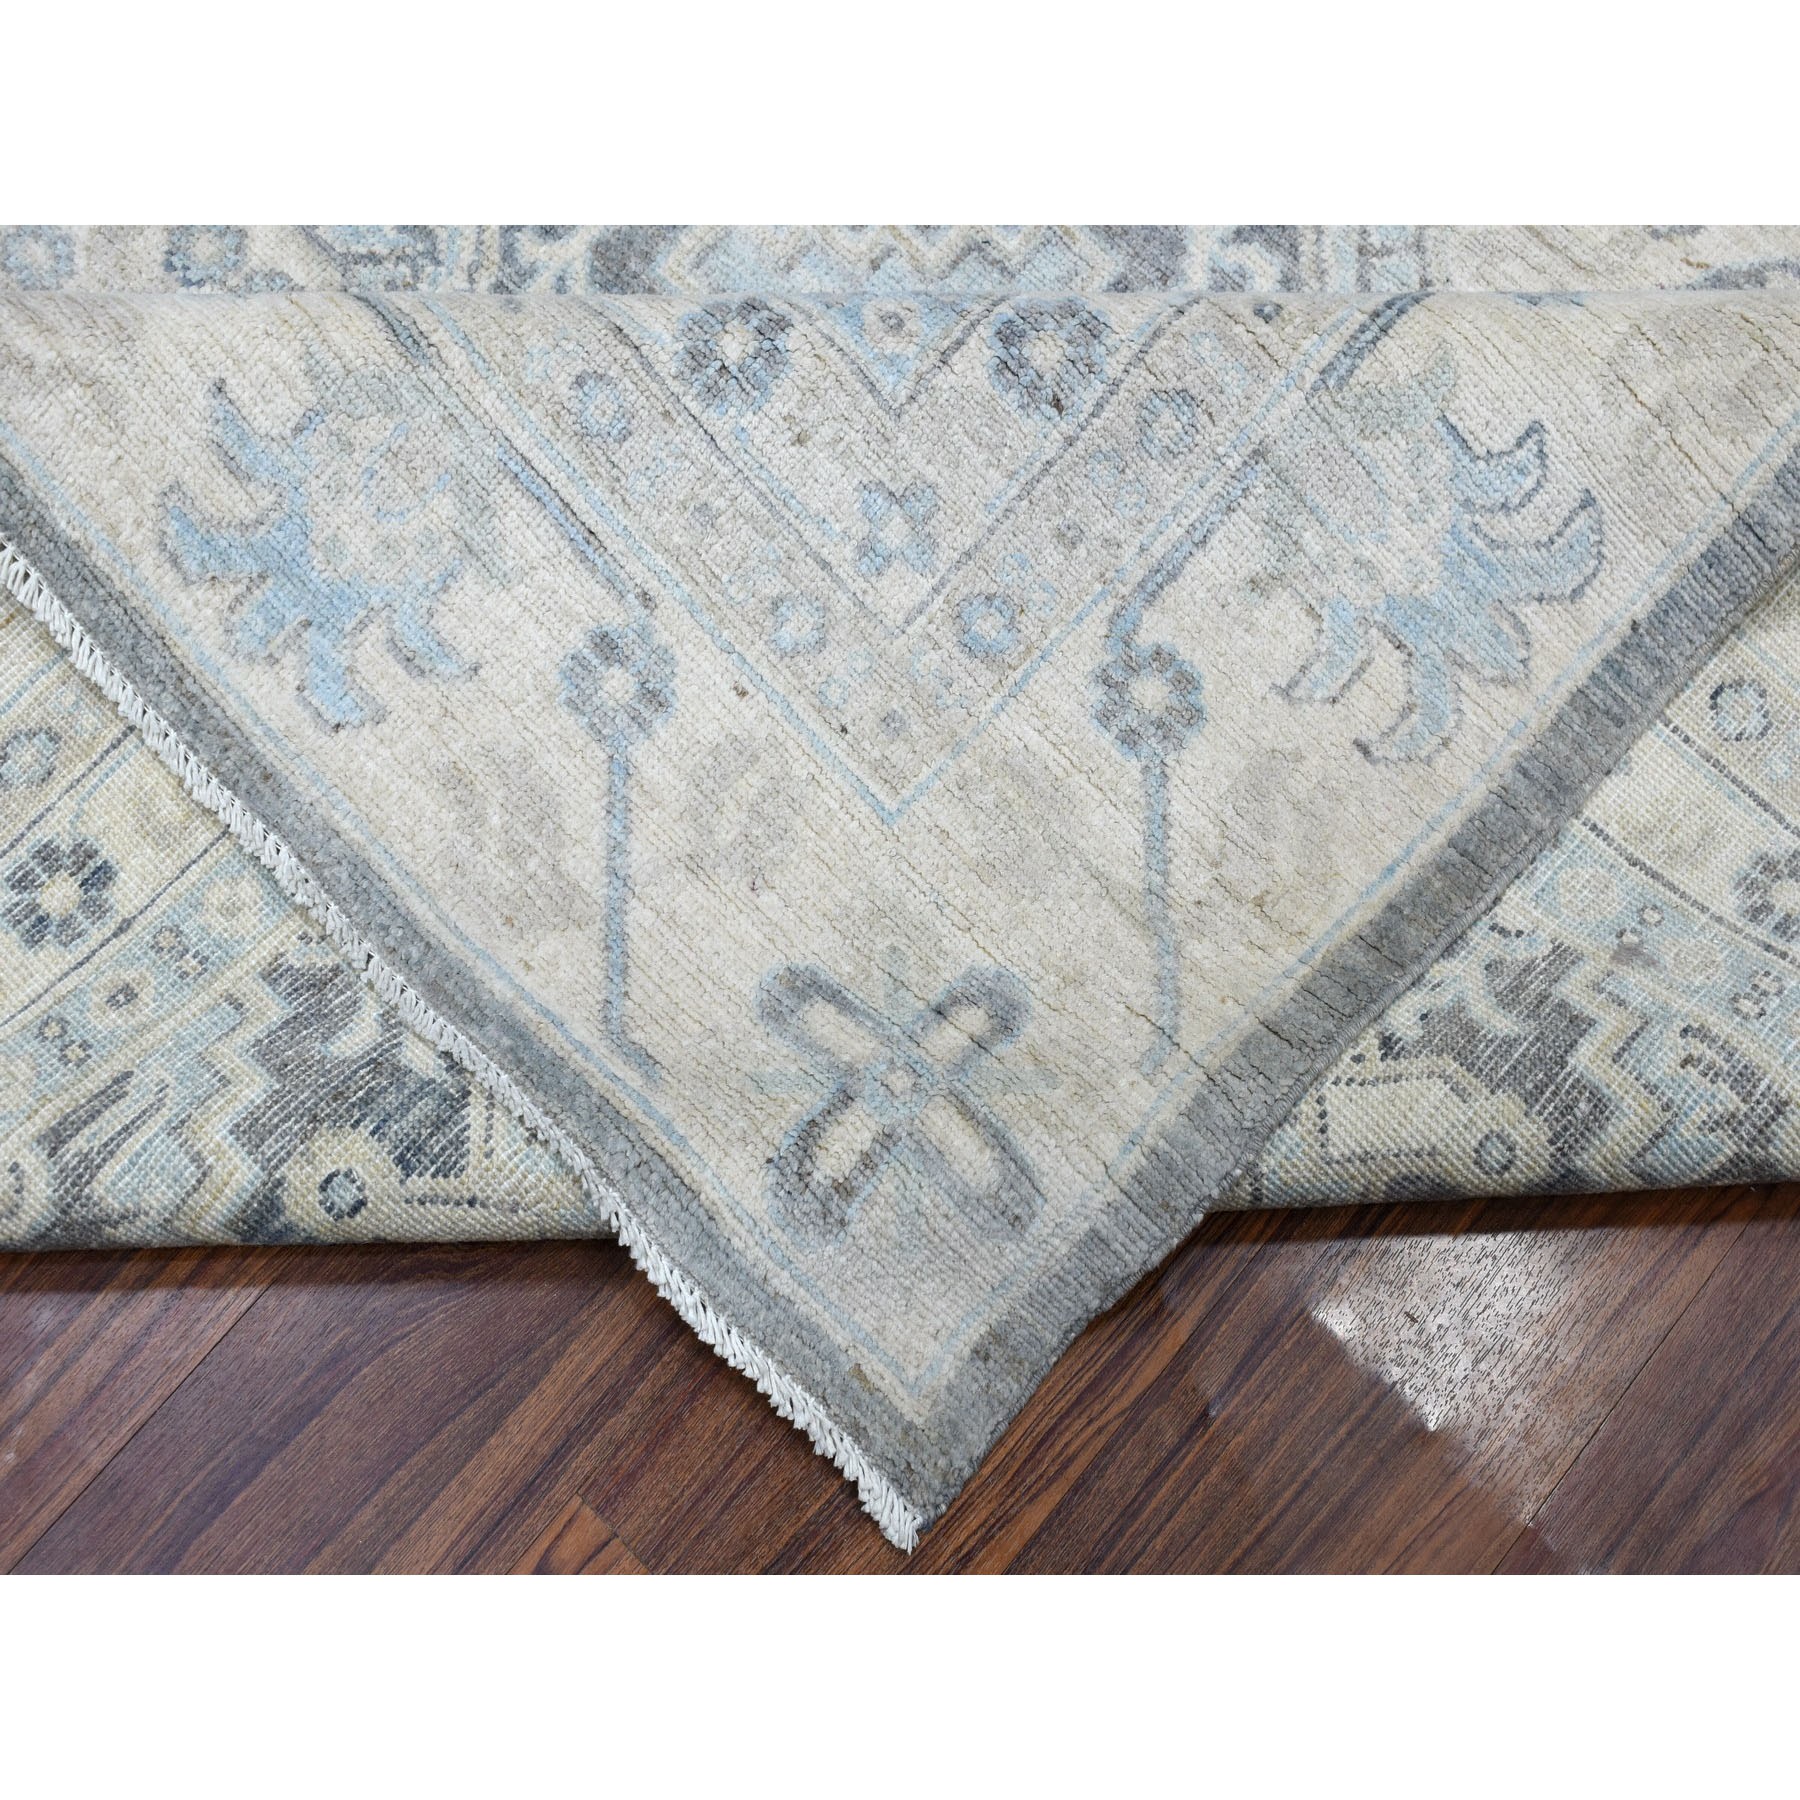 8-x10- White Wash Peshawar Pure Wool Hand Knotted Oriental Rug 